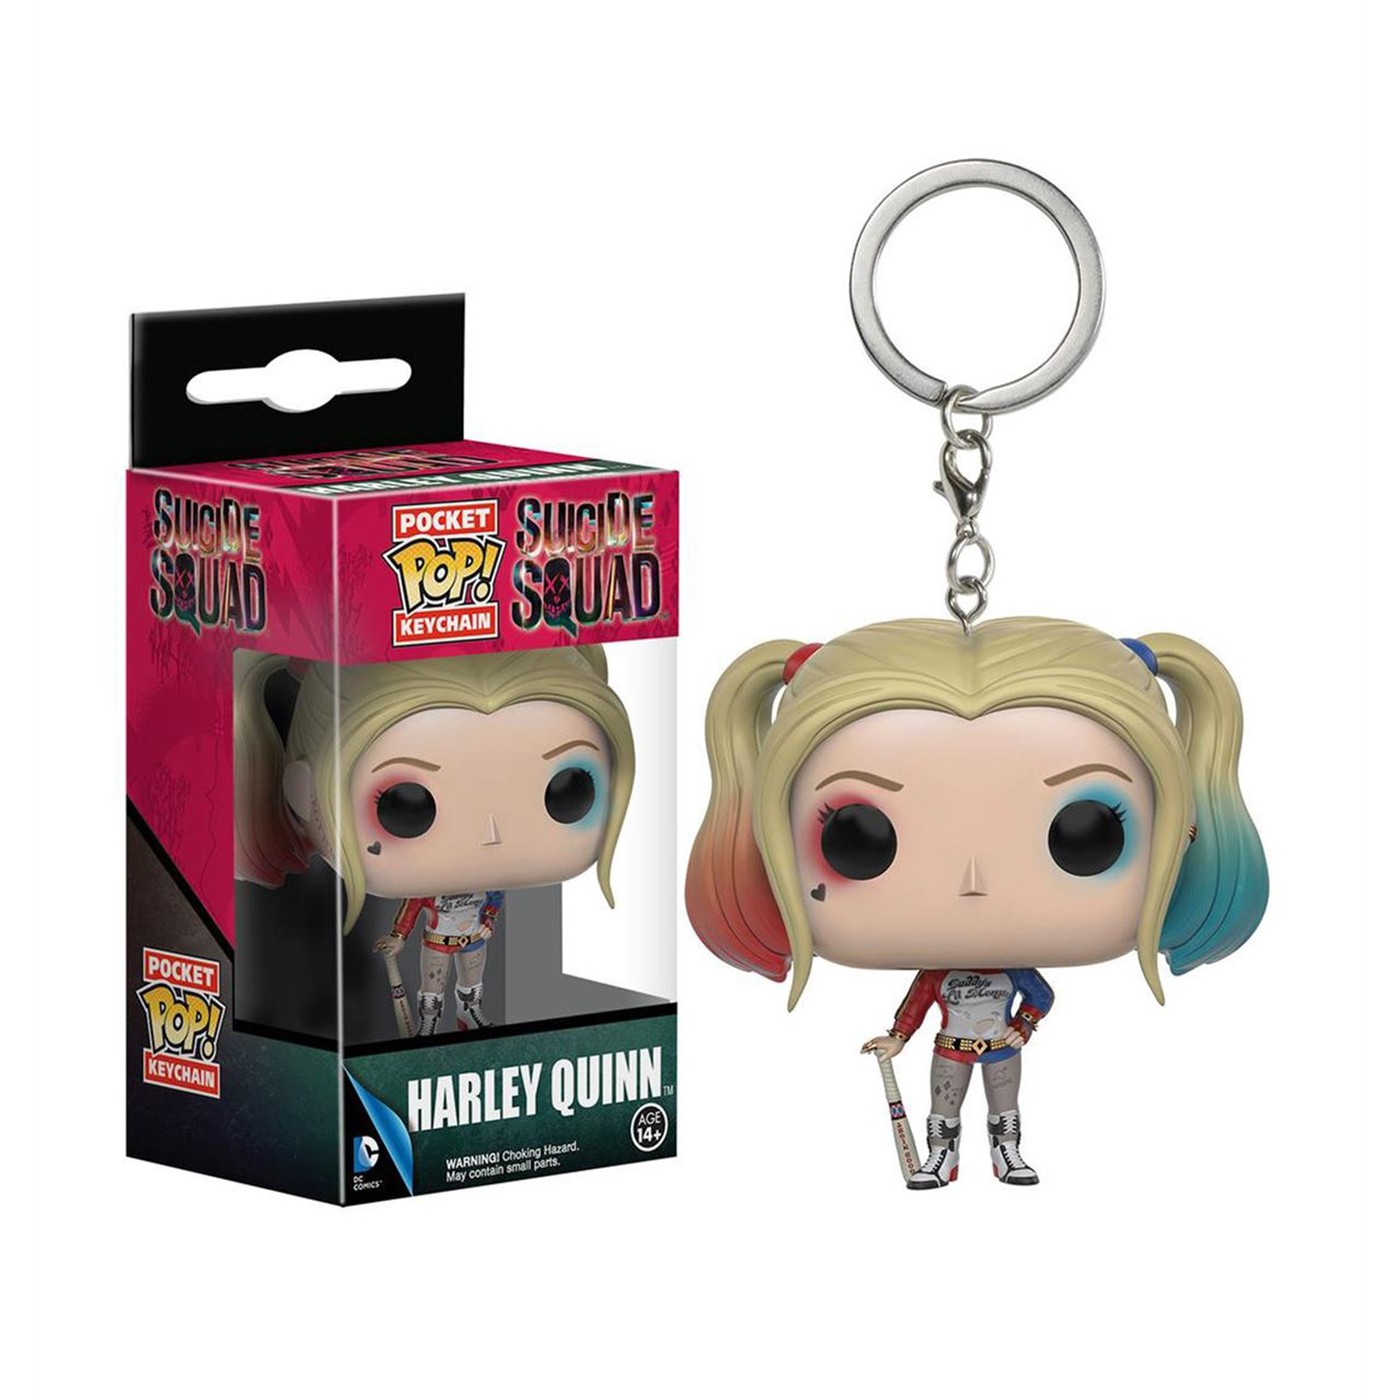 Suicide Squad Harley Quinn Pop Keychain